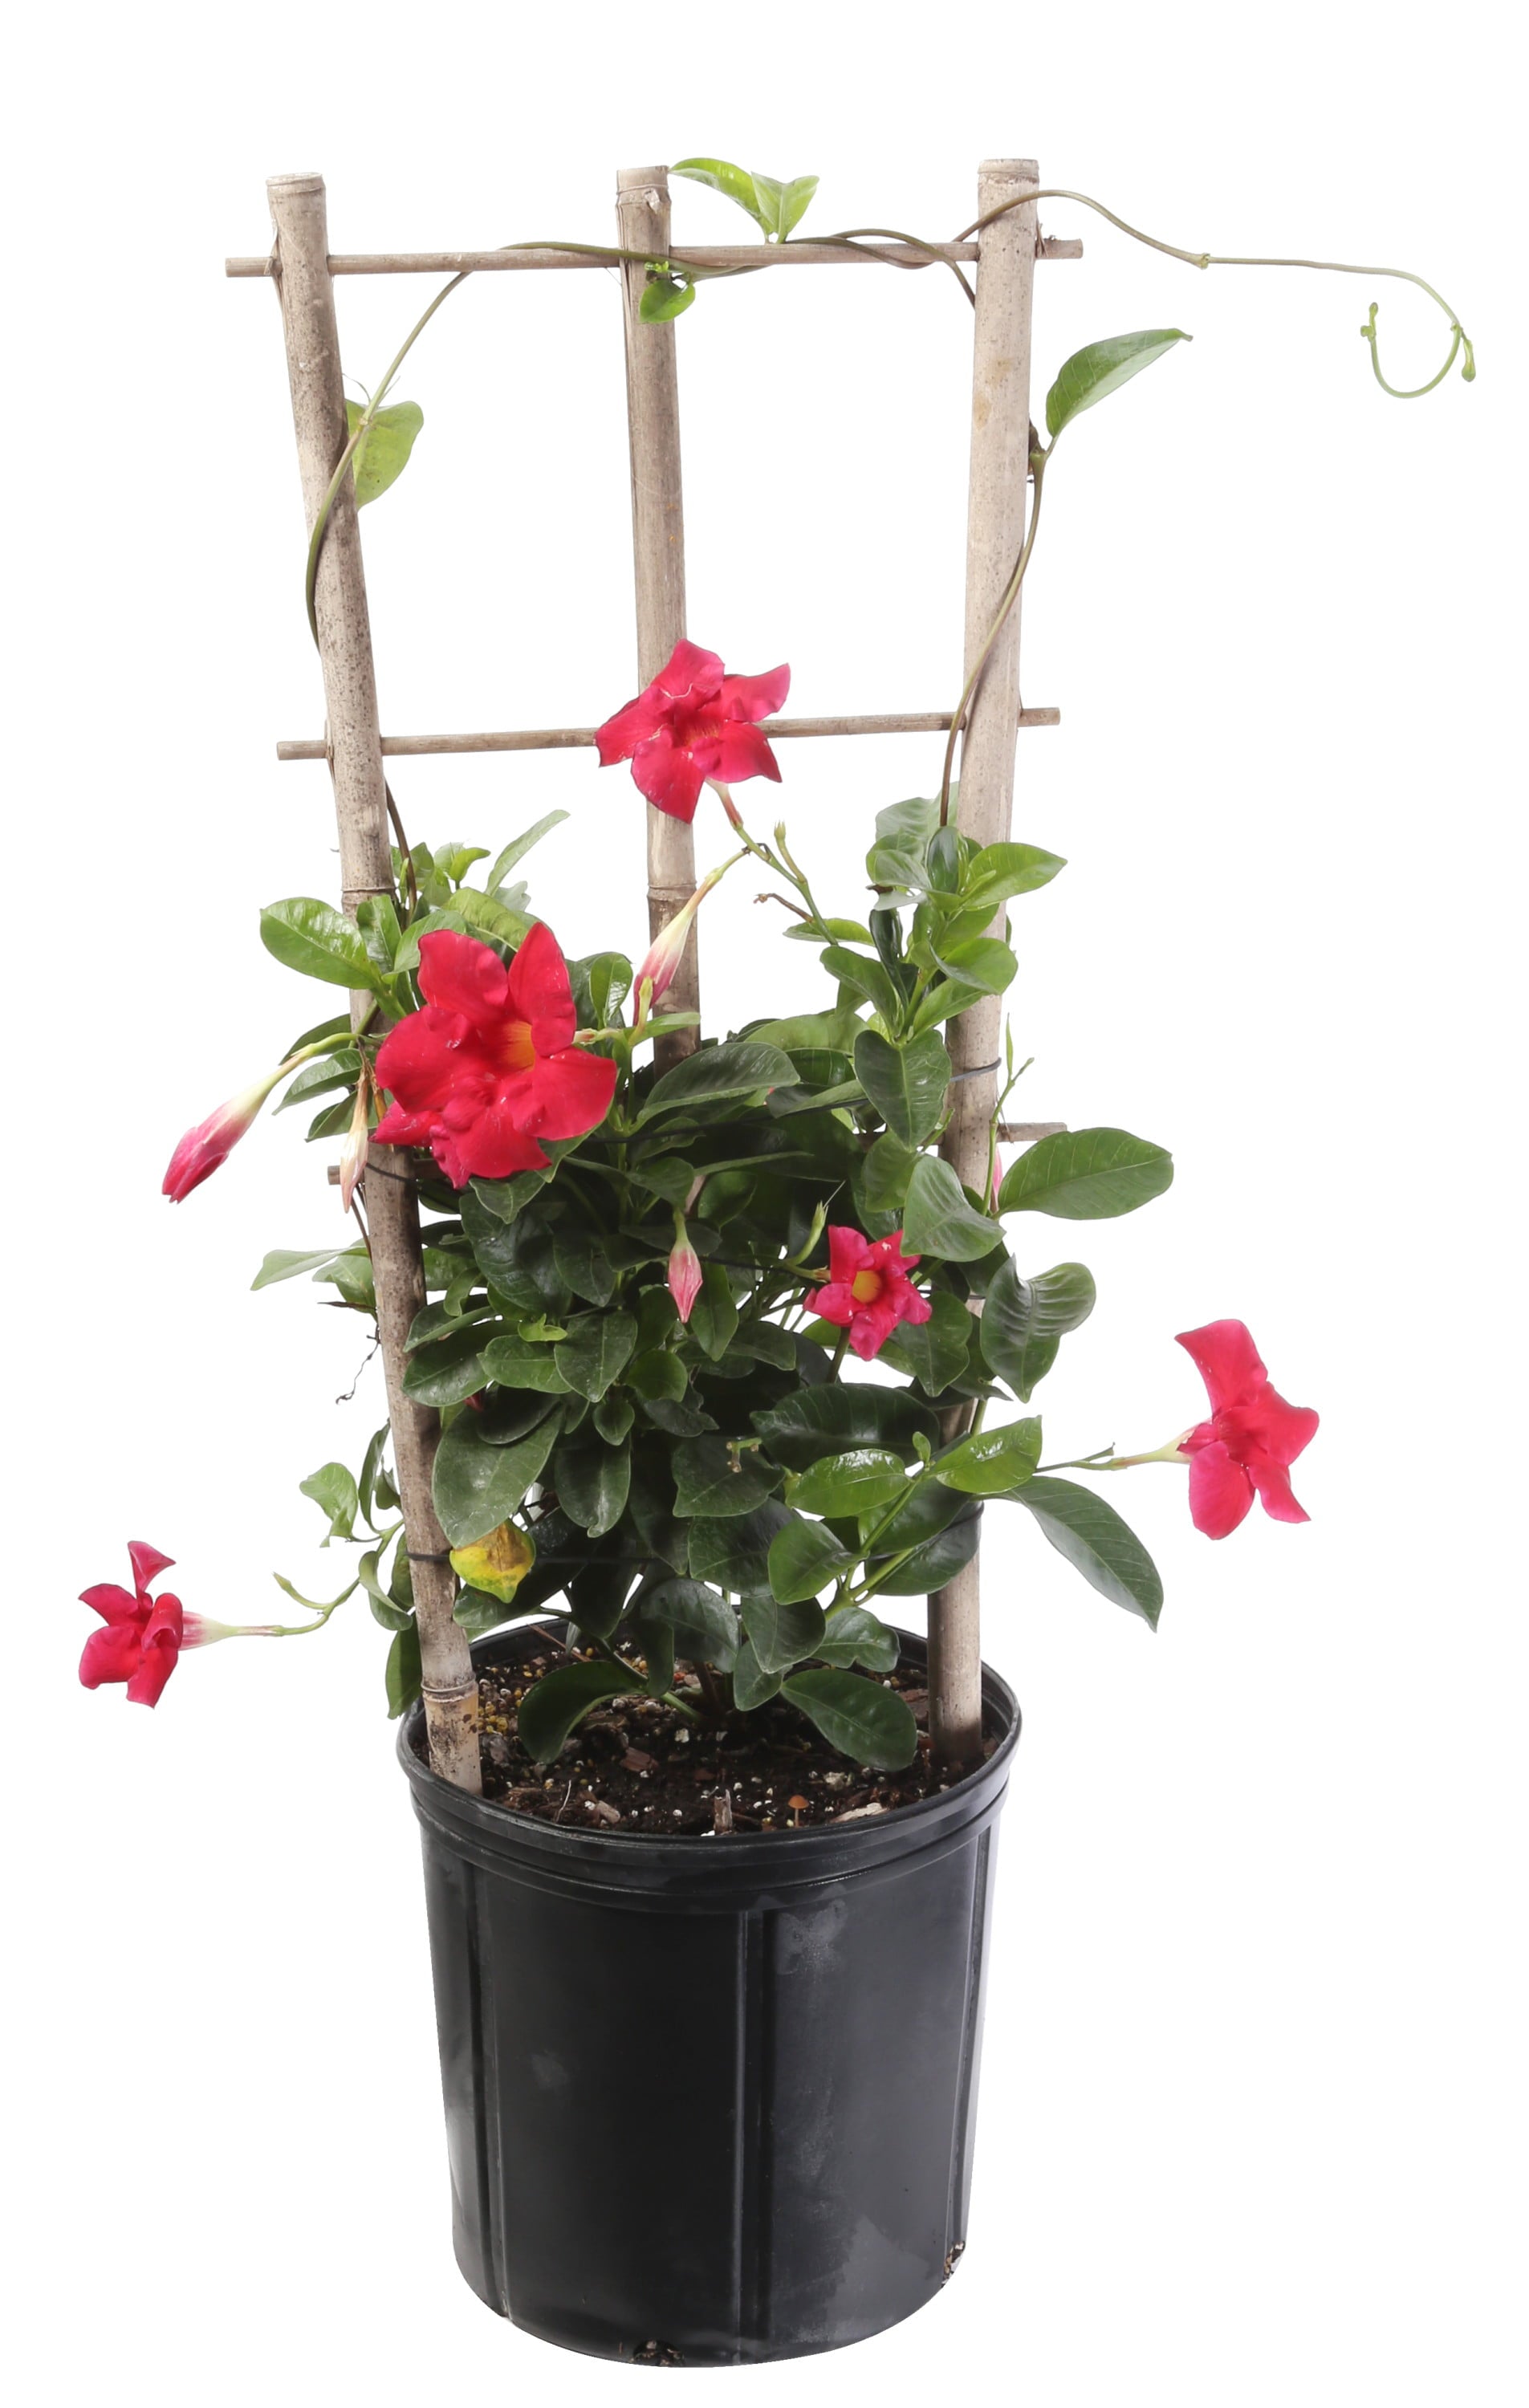 Costa Farms Island Blooms Live Outdoor 36in. Tall Assorted Mandevilla; Full Sun Outdoors Plant in 10in. Grower Pot